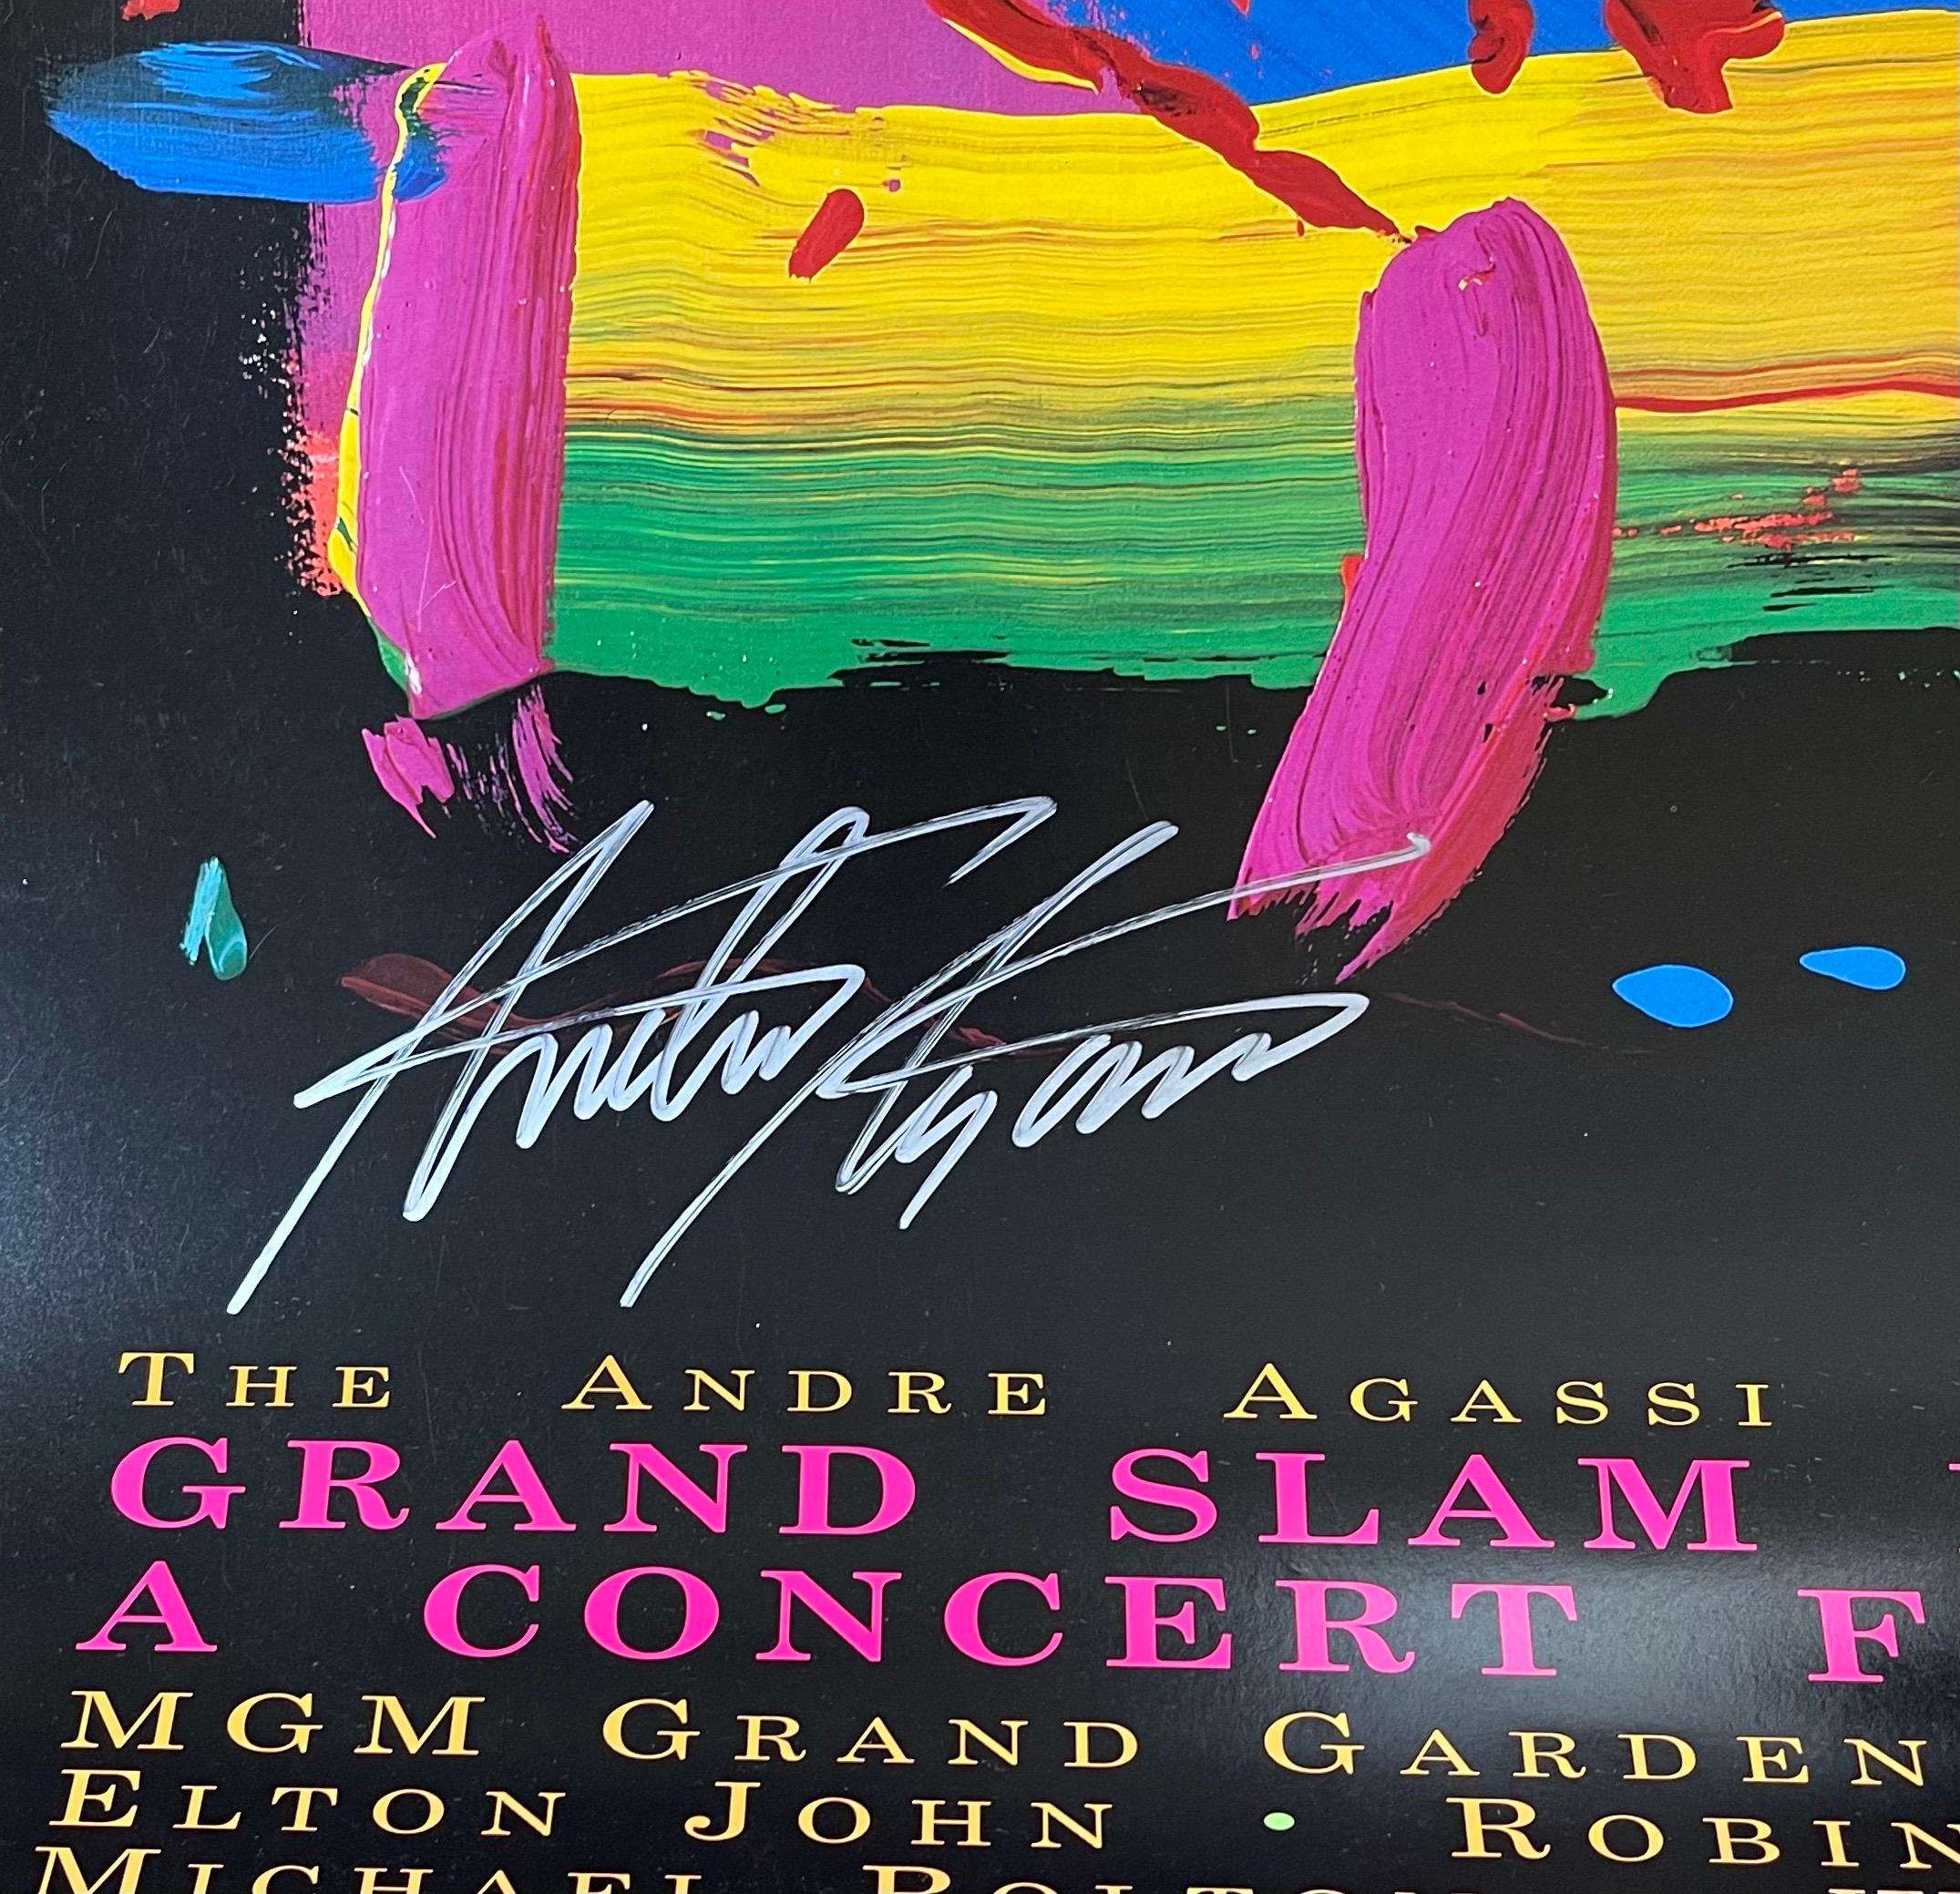 Paper Heart Poster Signed by Peter Max & Andre Agassi For Sale